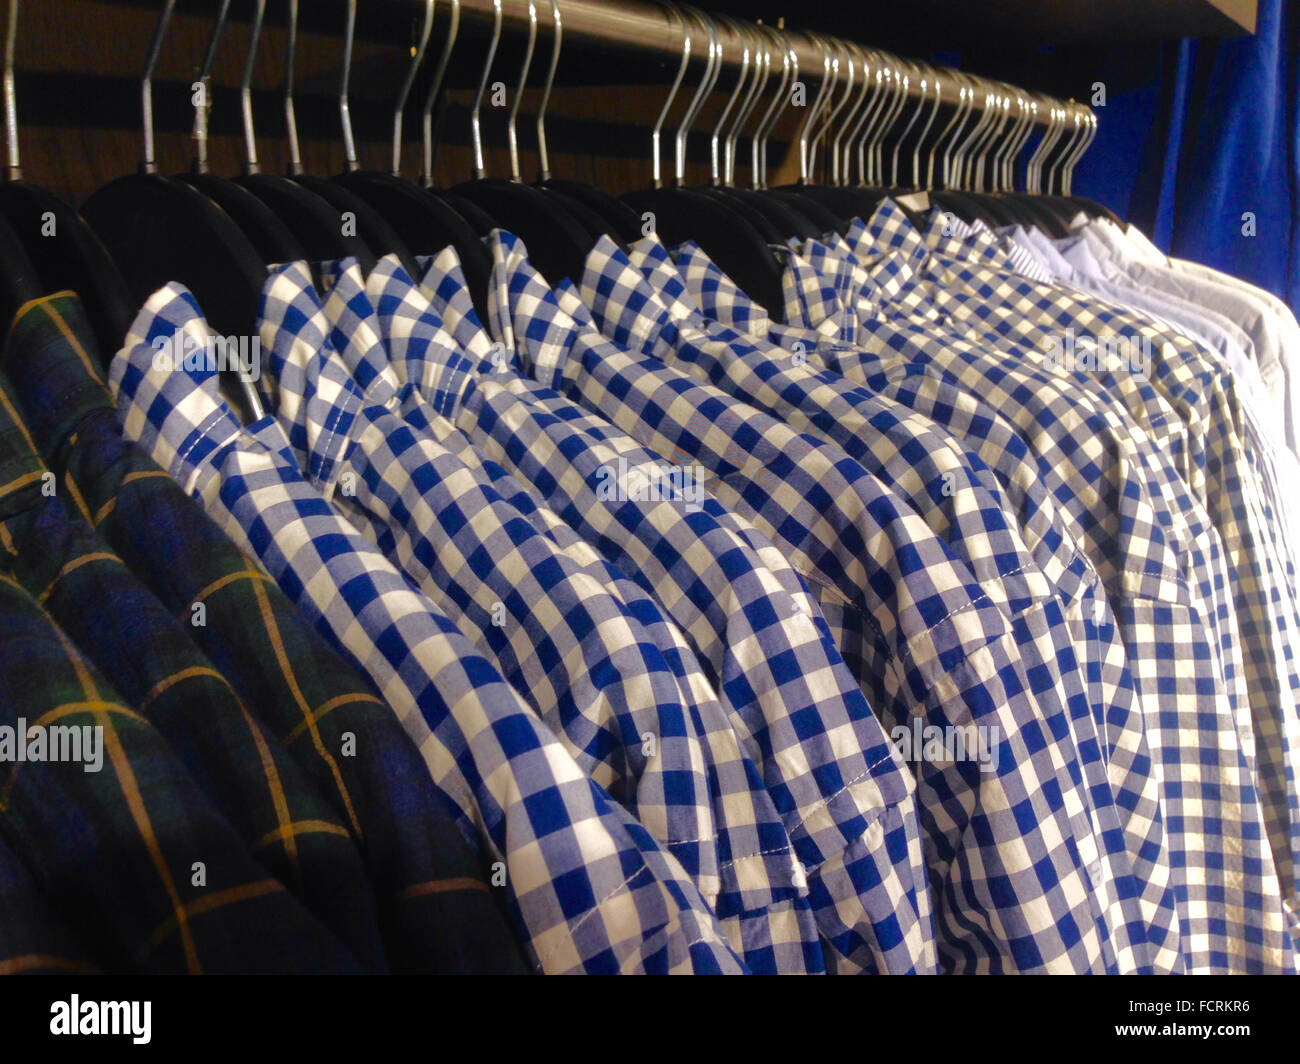 Hanger full of men's chequered shirts at shop Stock Photo